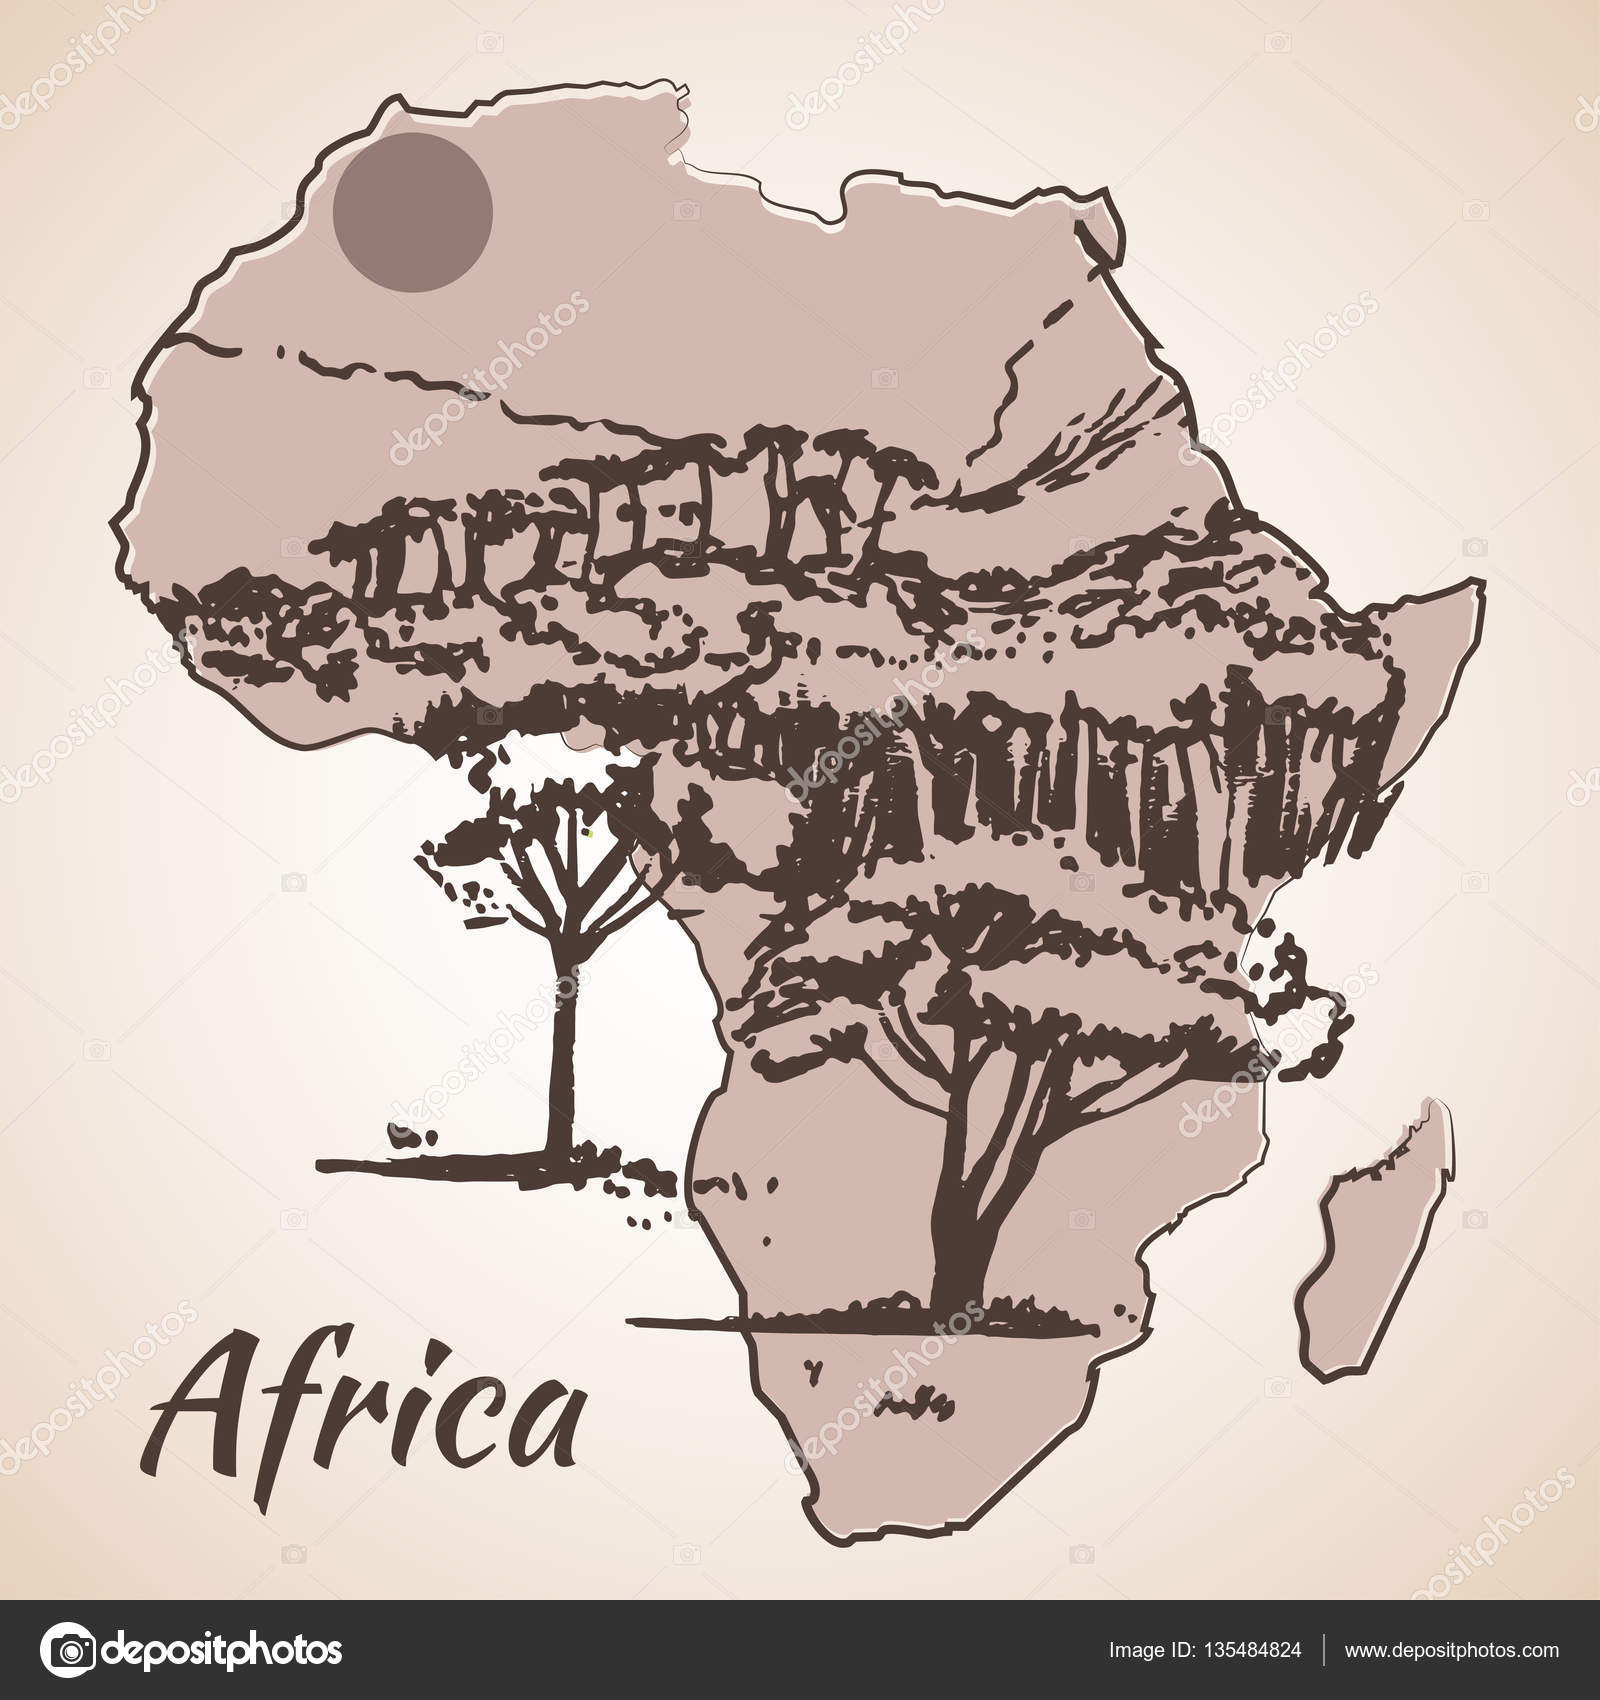 Africa Map Sketch / Africa Map Sketch High Res Stock Images